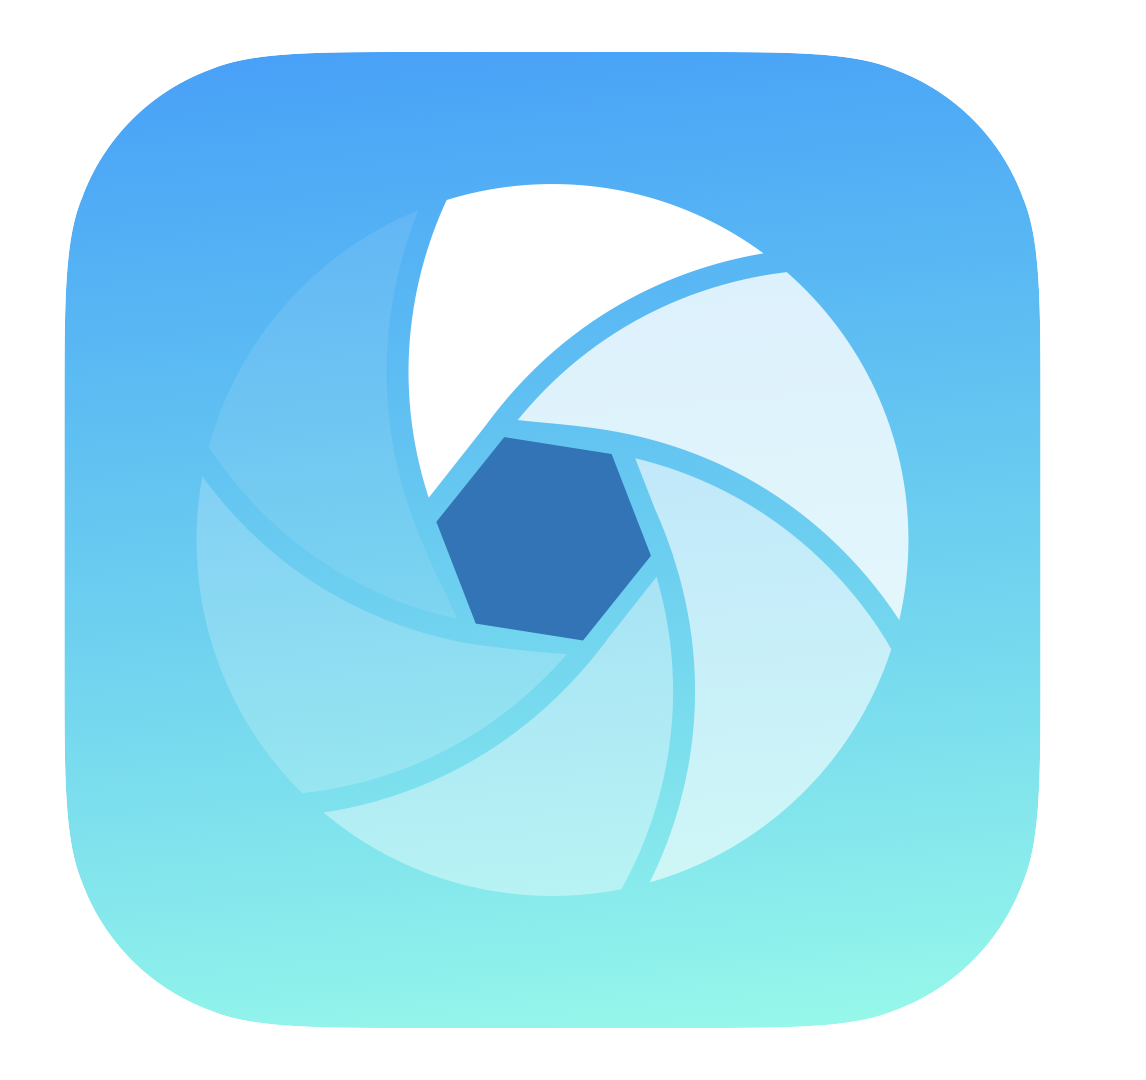 An app icon for a photography app